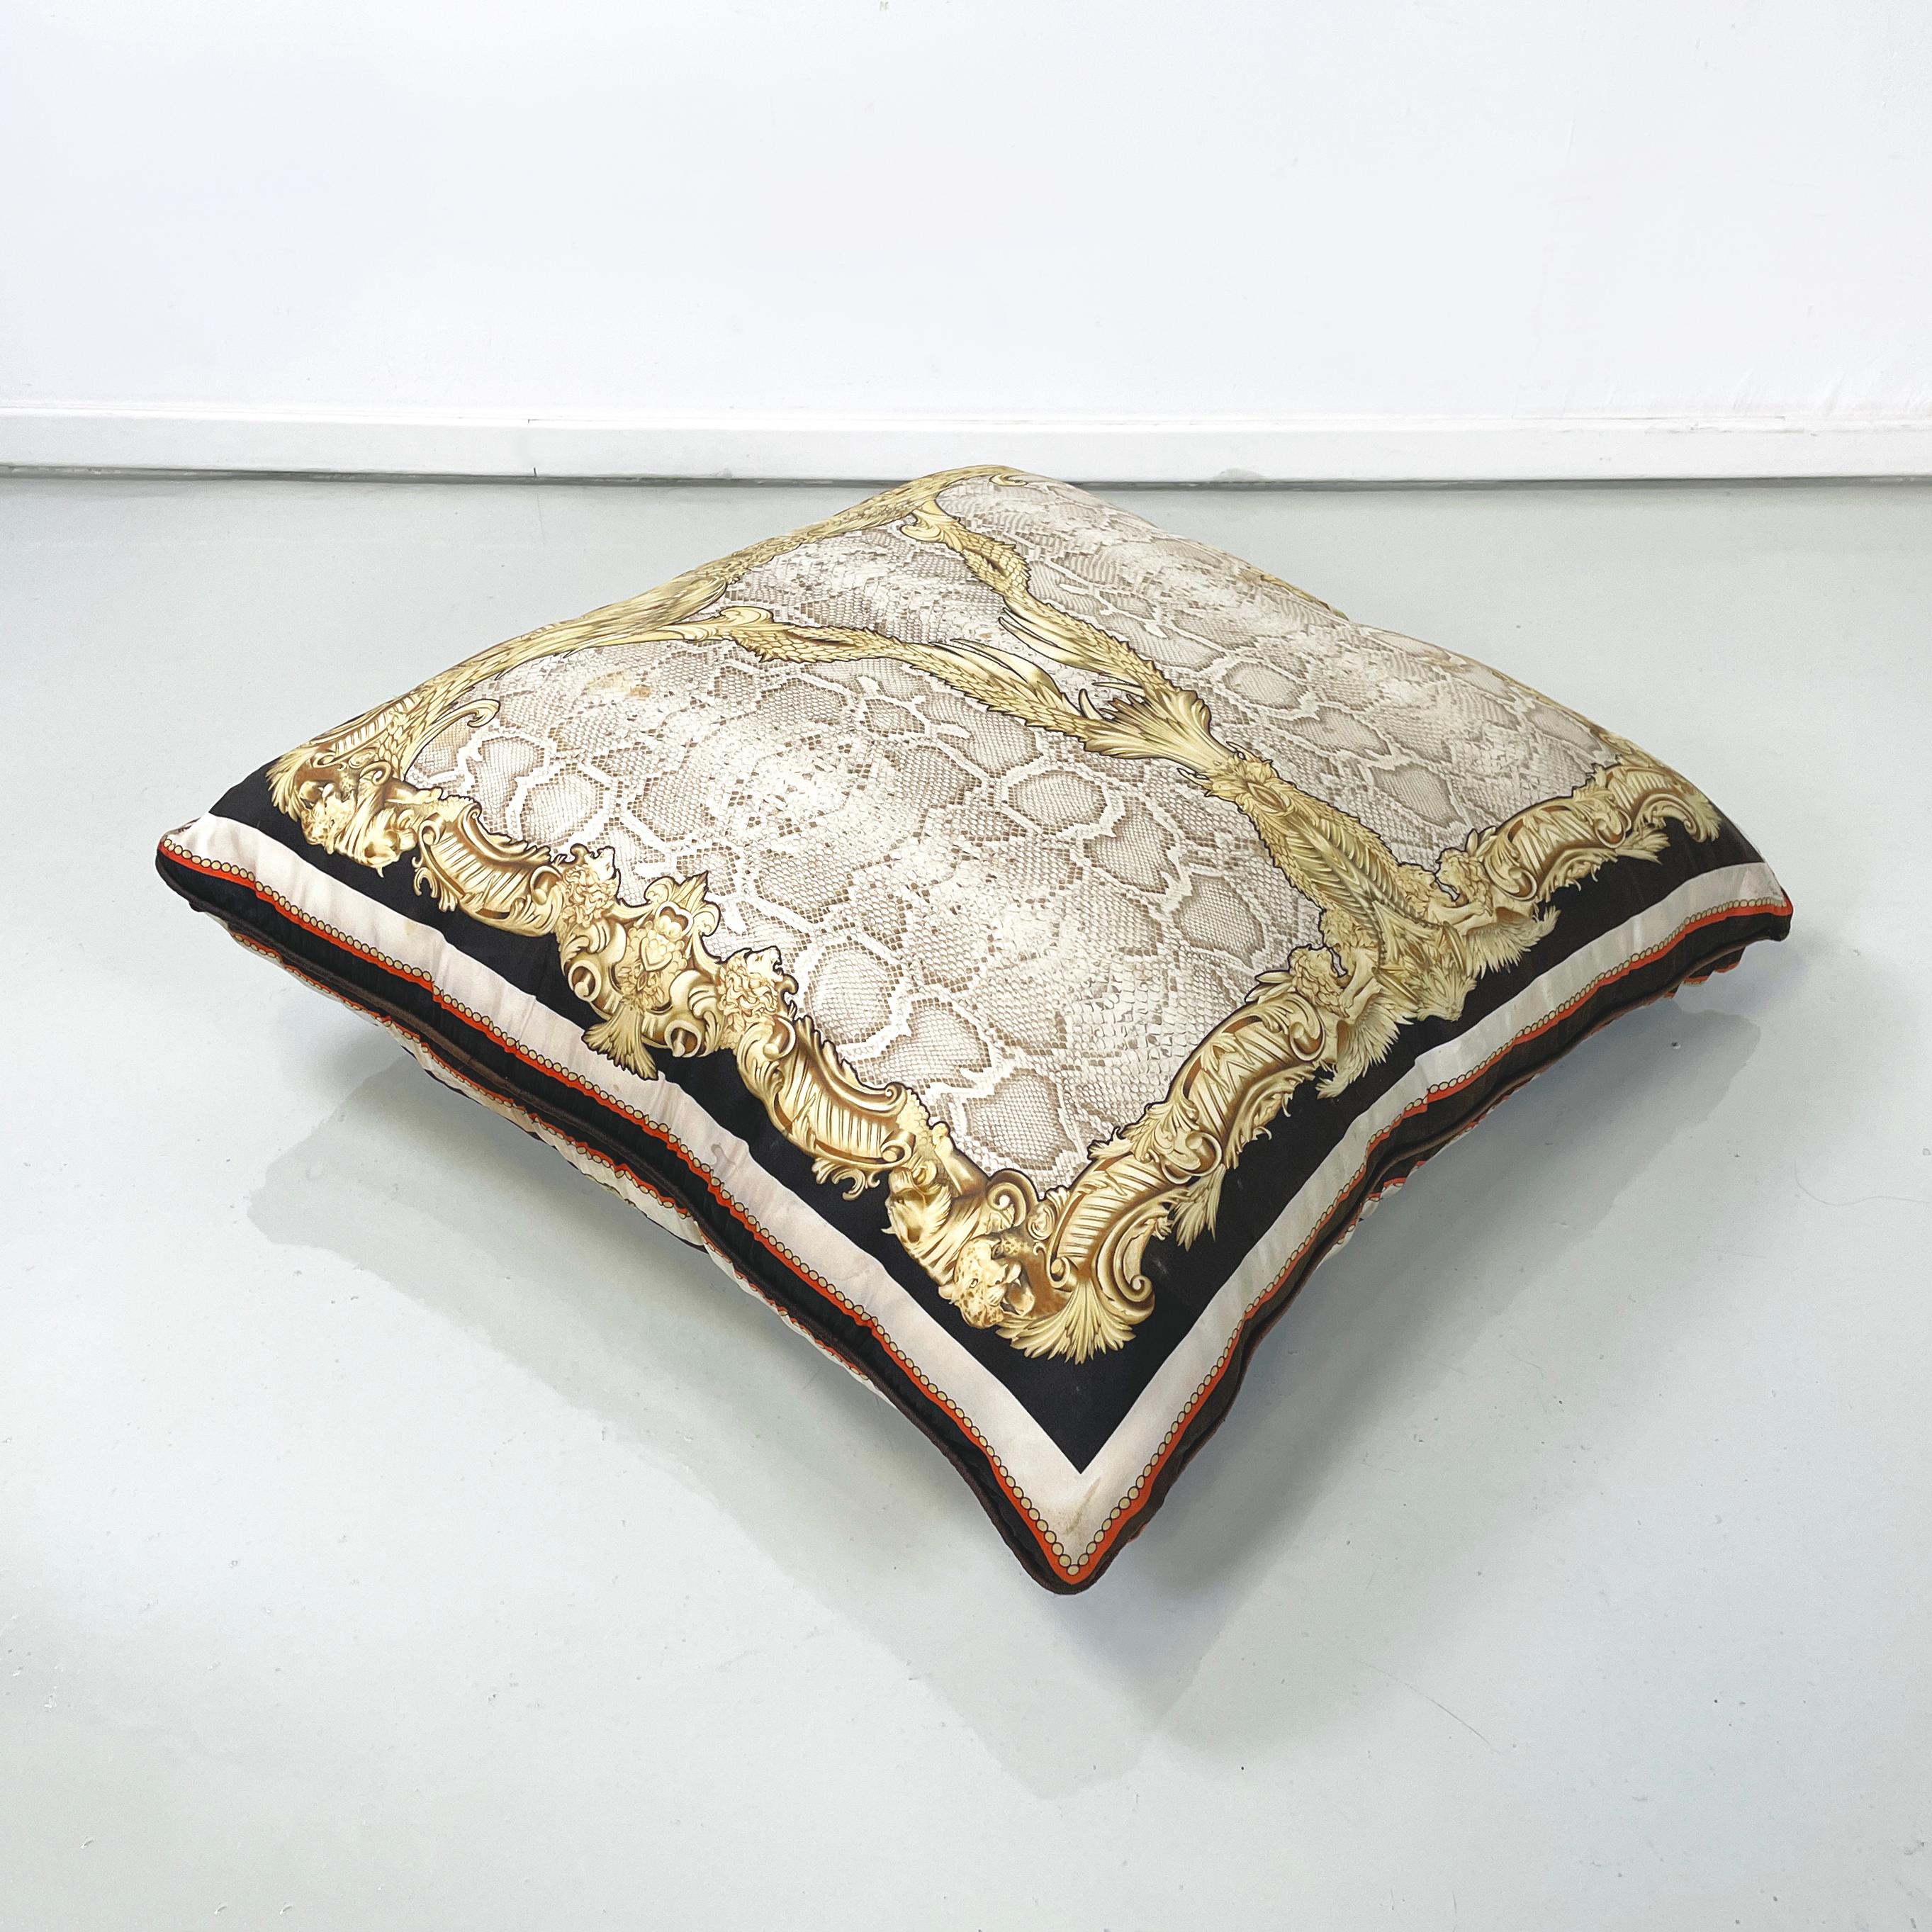 Italian post modern Fabric cushion with colored pattern by Roberto Cavalli, 2000s
Large square cushion in patterned fabric. In the center there is a crocodile print in beige tones, framed by motifs of feathered wings and feline figures, in yellow